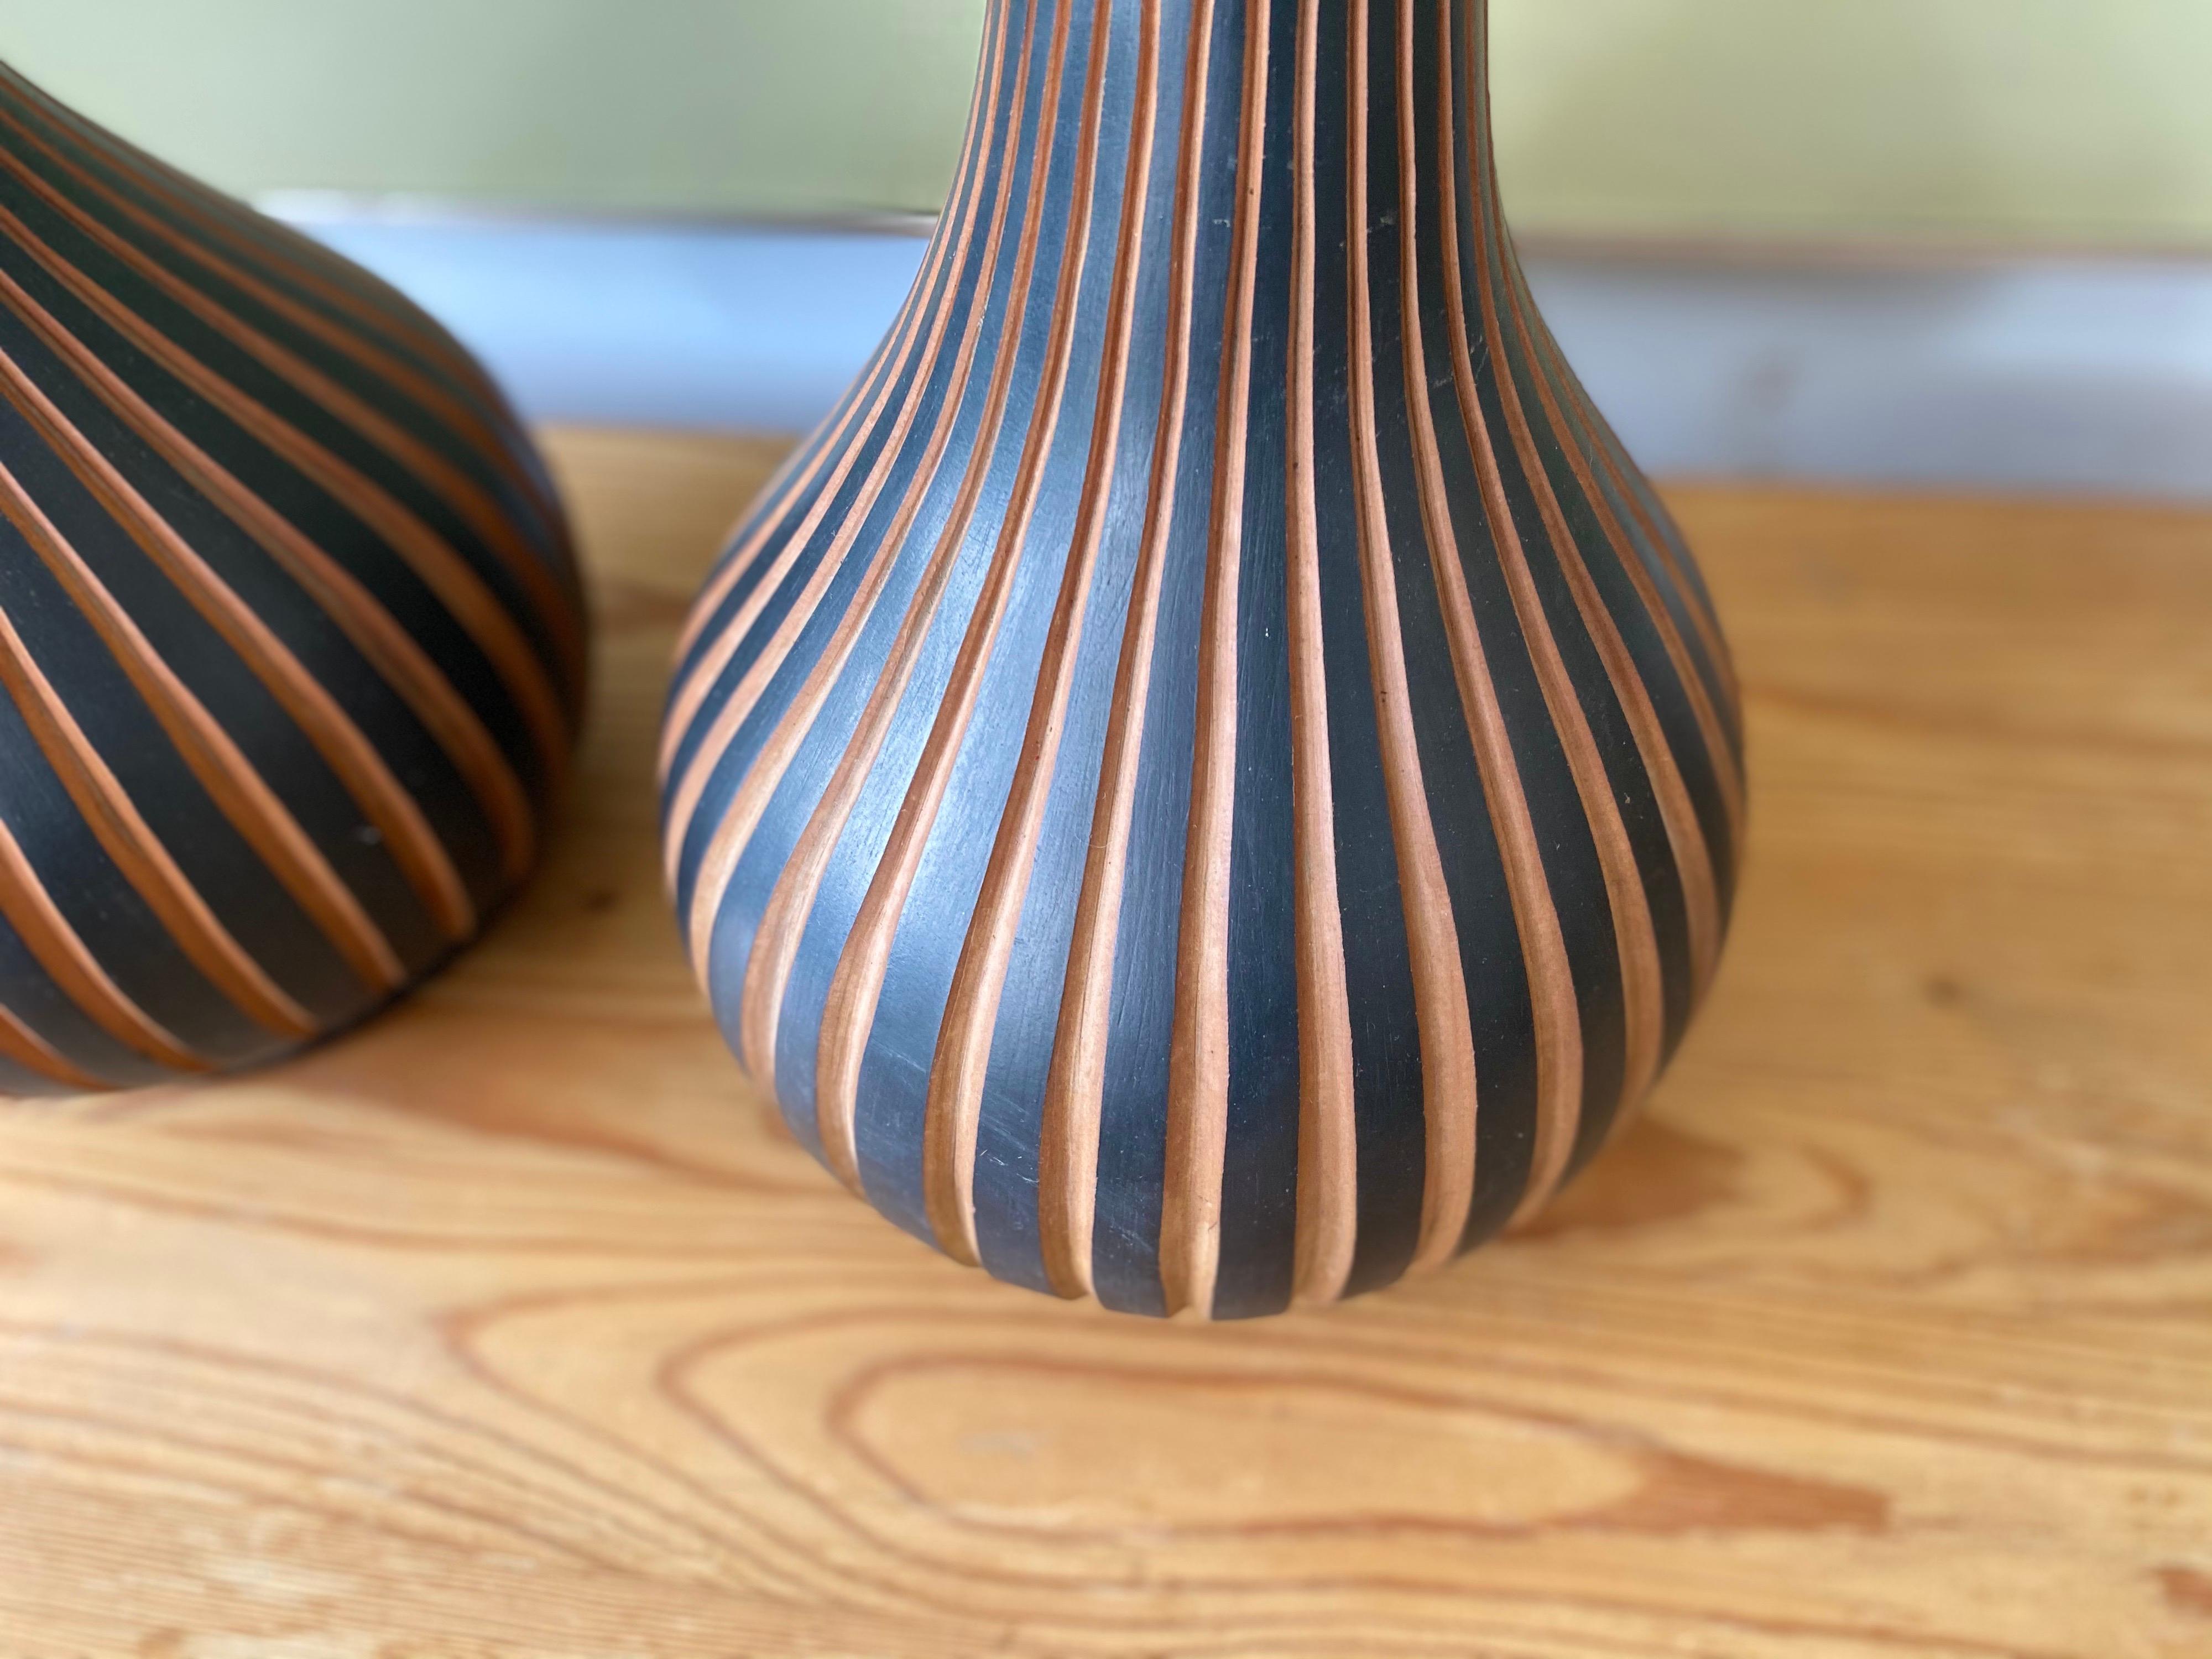 Pair of vintage Texcoco ceramic table lamps featuring a terracotta coloring, teardrop / bulbous form, and three-dimensional black matte vertical linear design. This unique sculptural lighting is in overall good condition and is sold as a set.